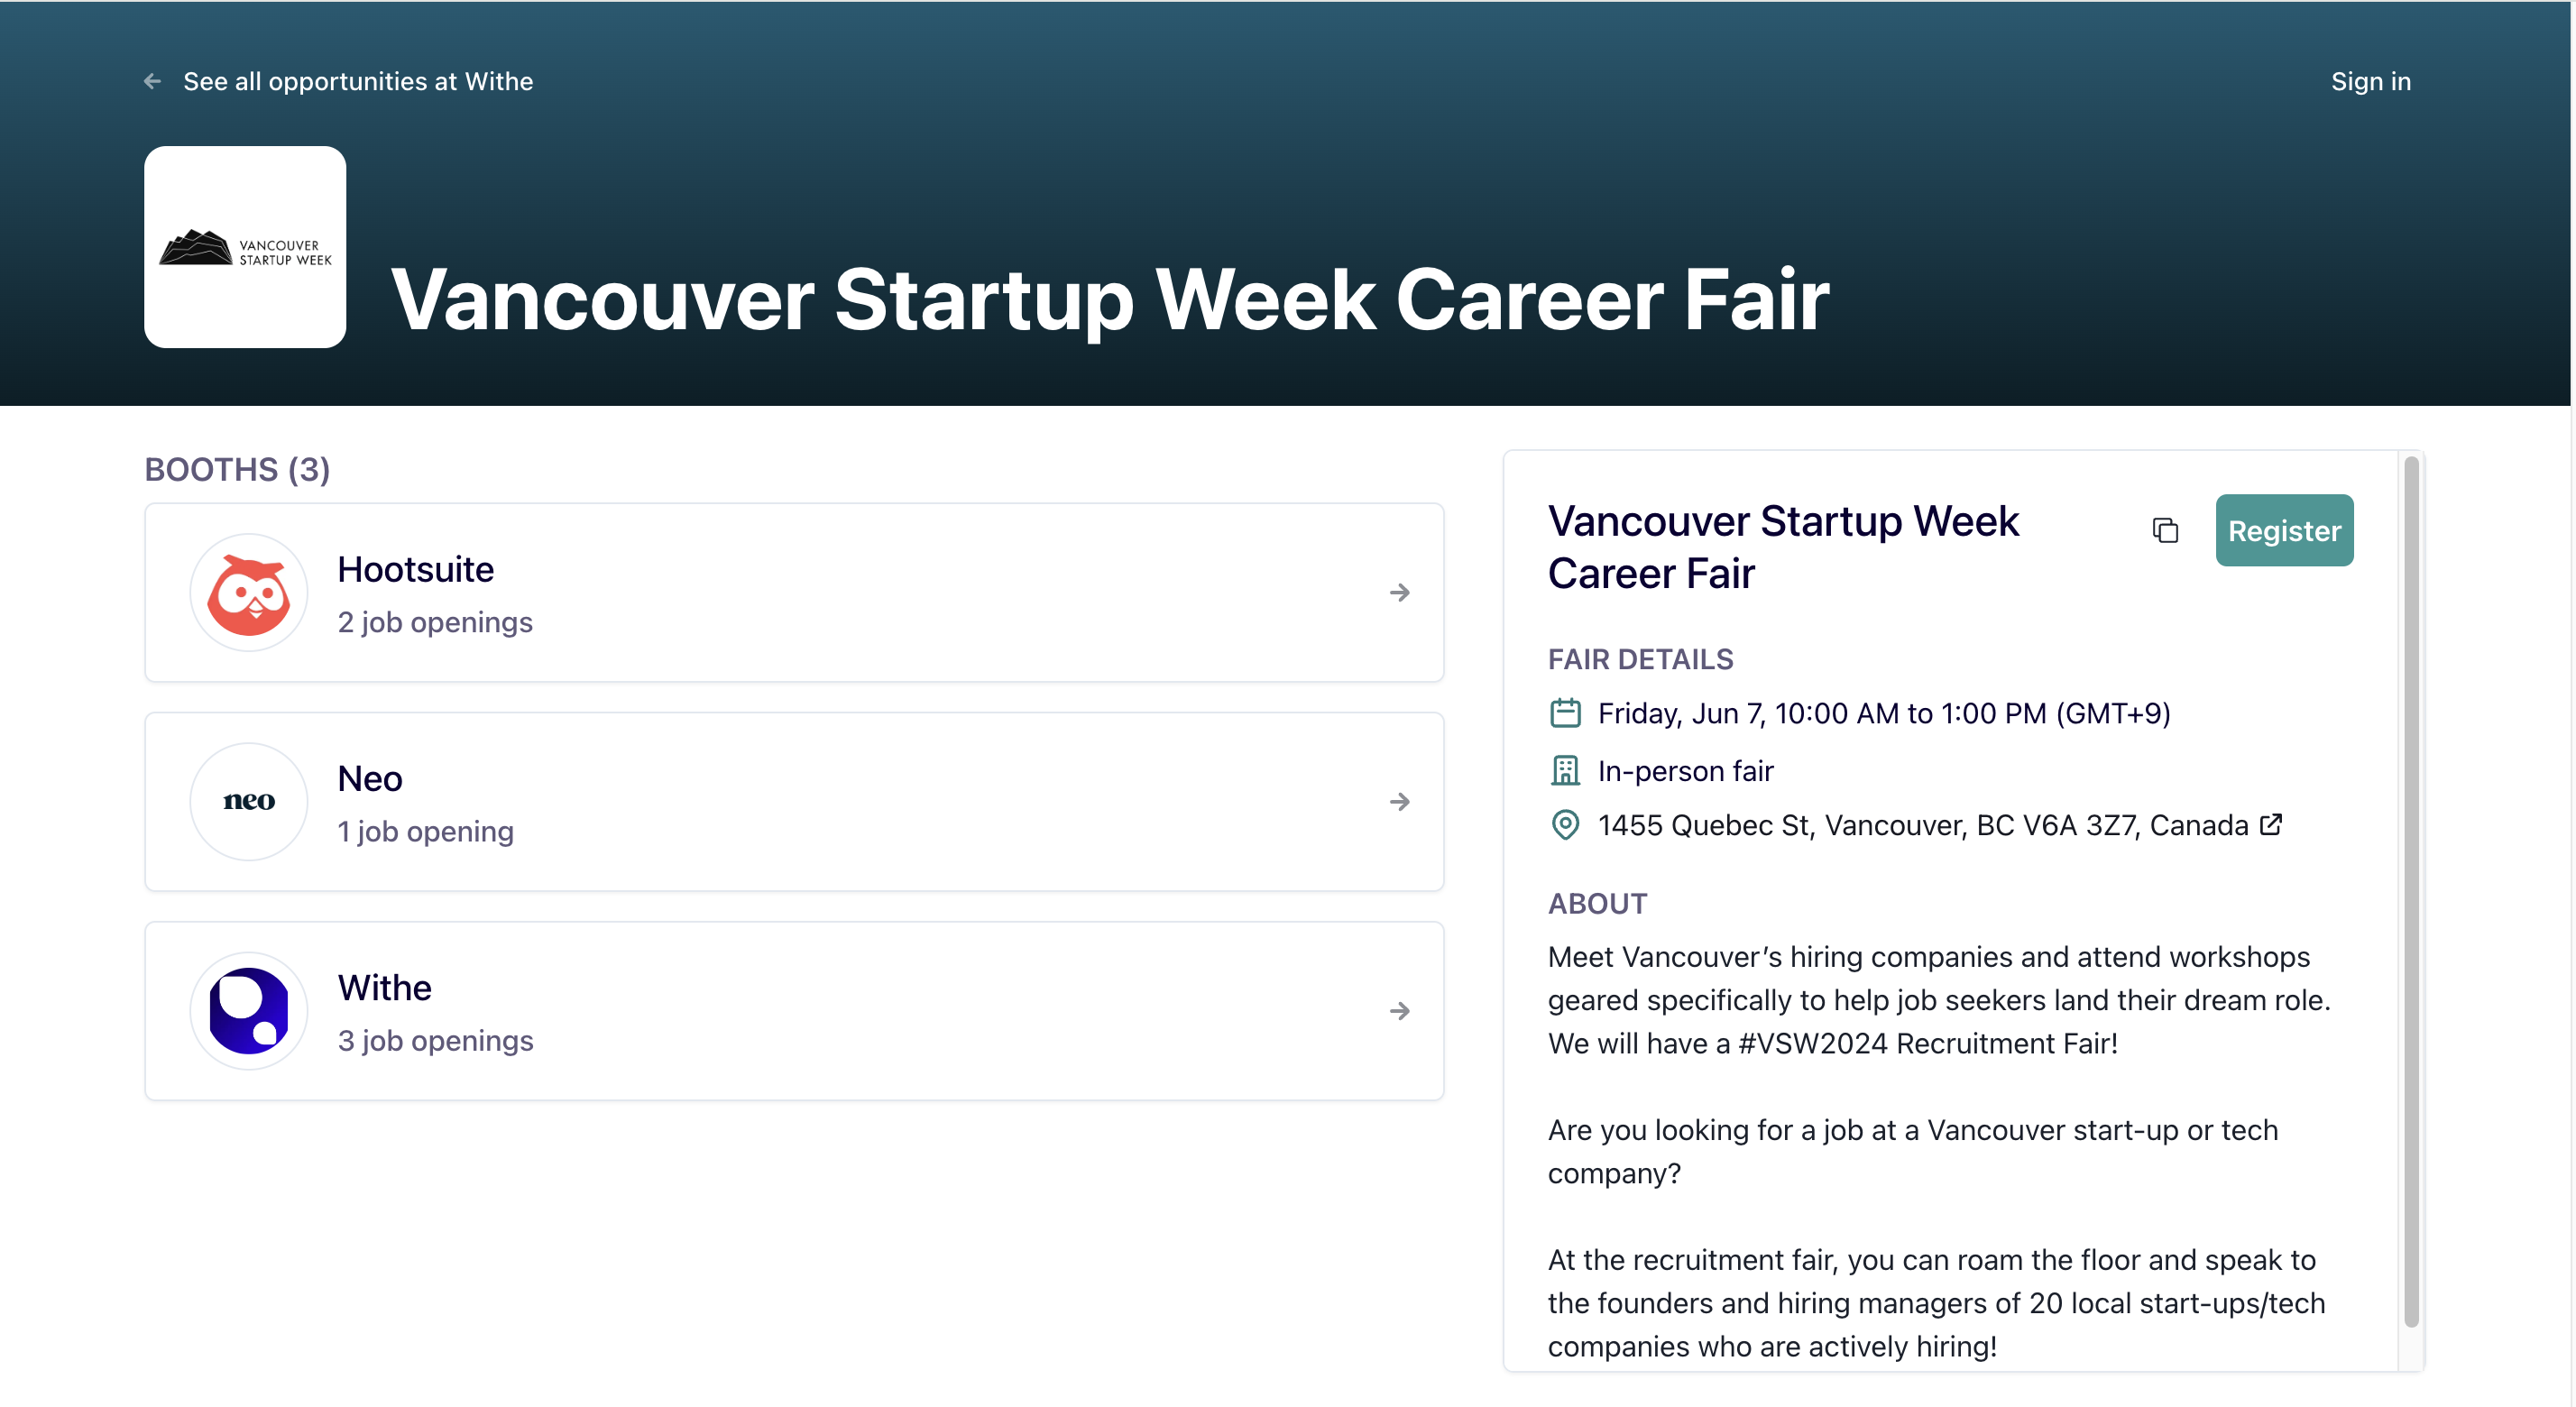 A Withe job fair site showing company booths.